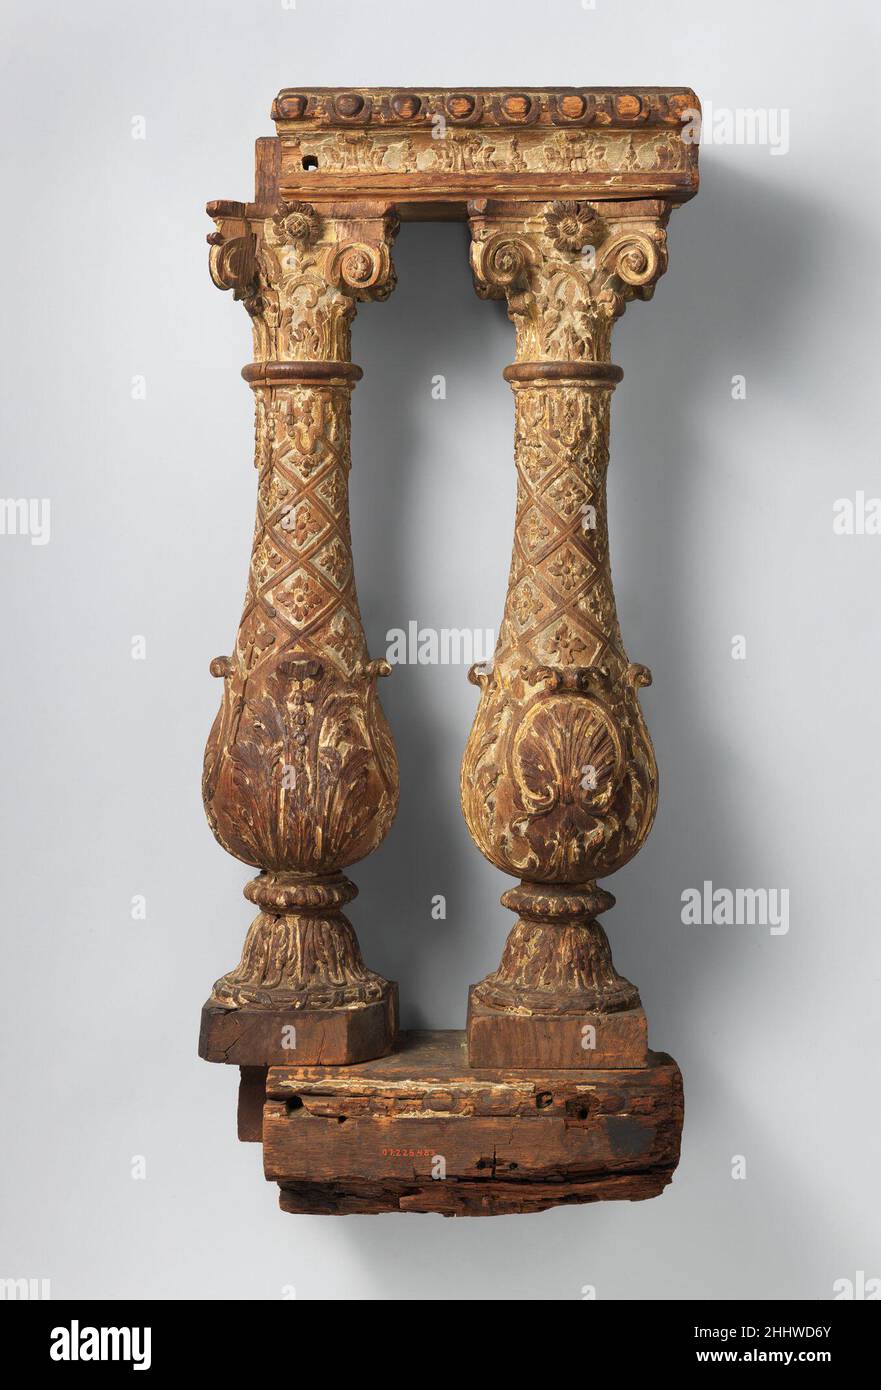 Pair of balusters late 17th century French. Pair of balusters  189735 French, Pair of balusters, late 17th century, Carved and originally painted and gilded, oak, Height (each): 34 in. (86.4 cm). The Metropolitan Museum of Art, New York. Gift of J. Pierpont Morgan, 1906 (07.225.483a, b) Stock Photo